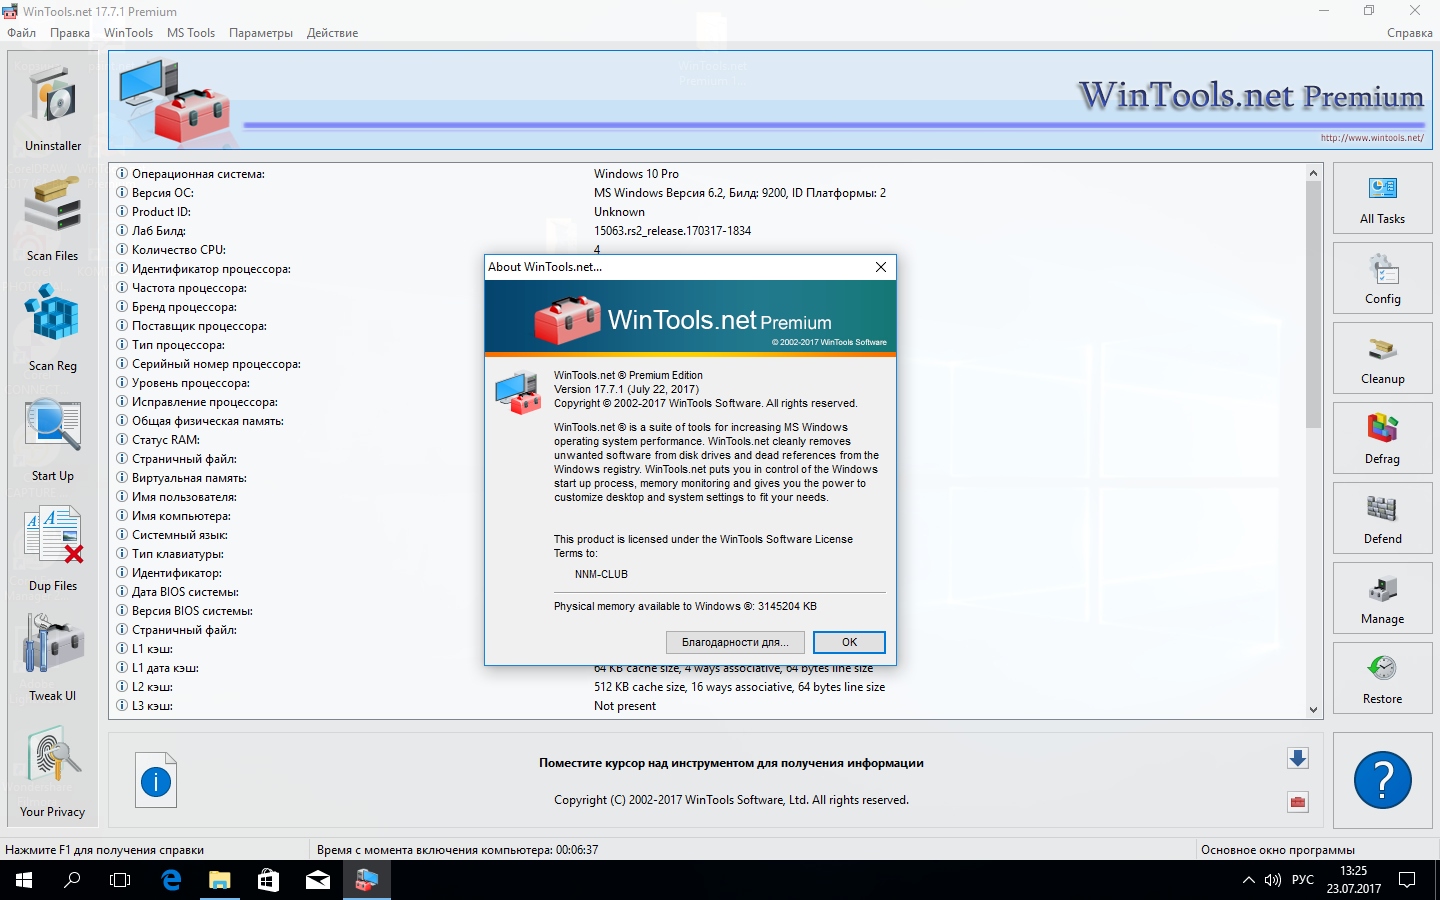 instal the new version for apple WinTools net Premium 23.7.1